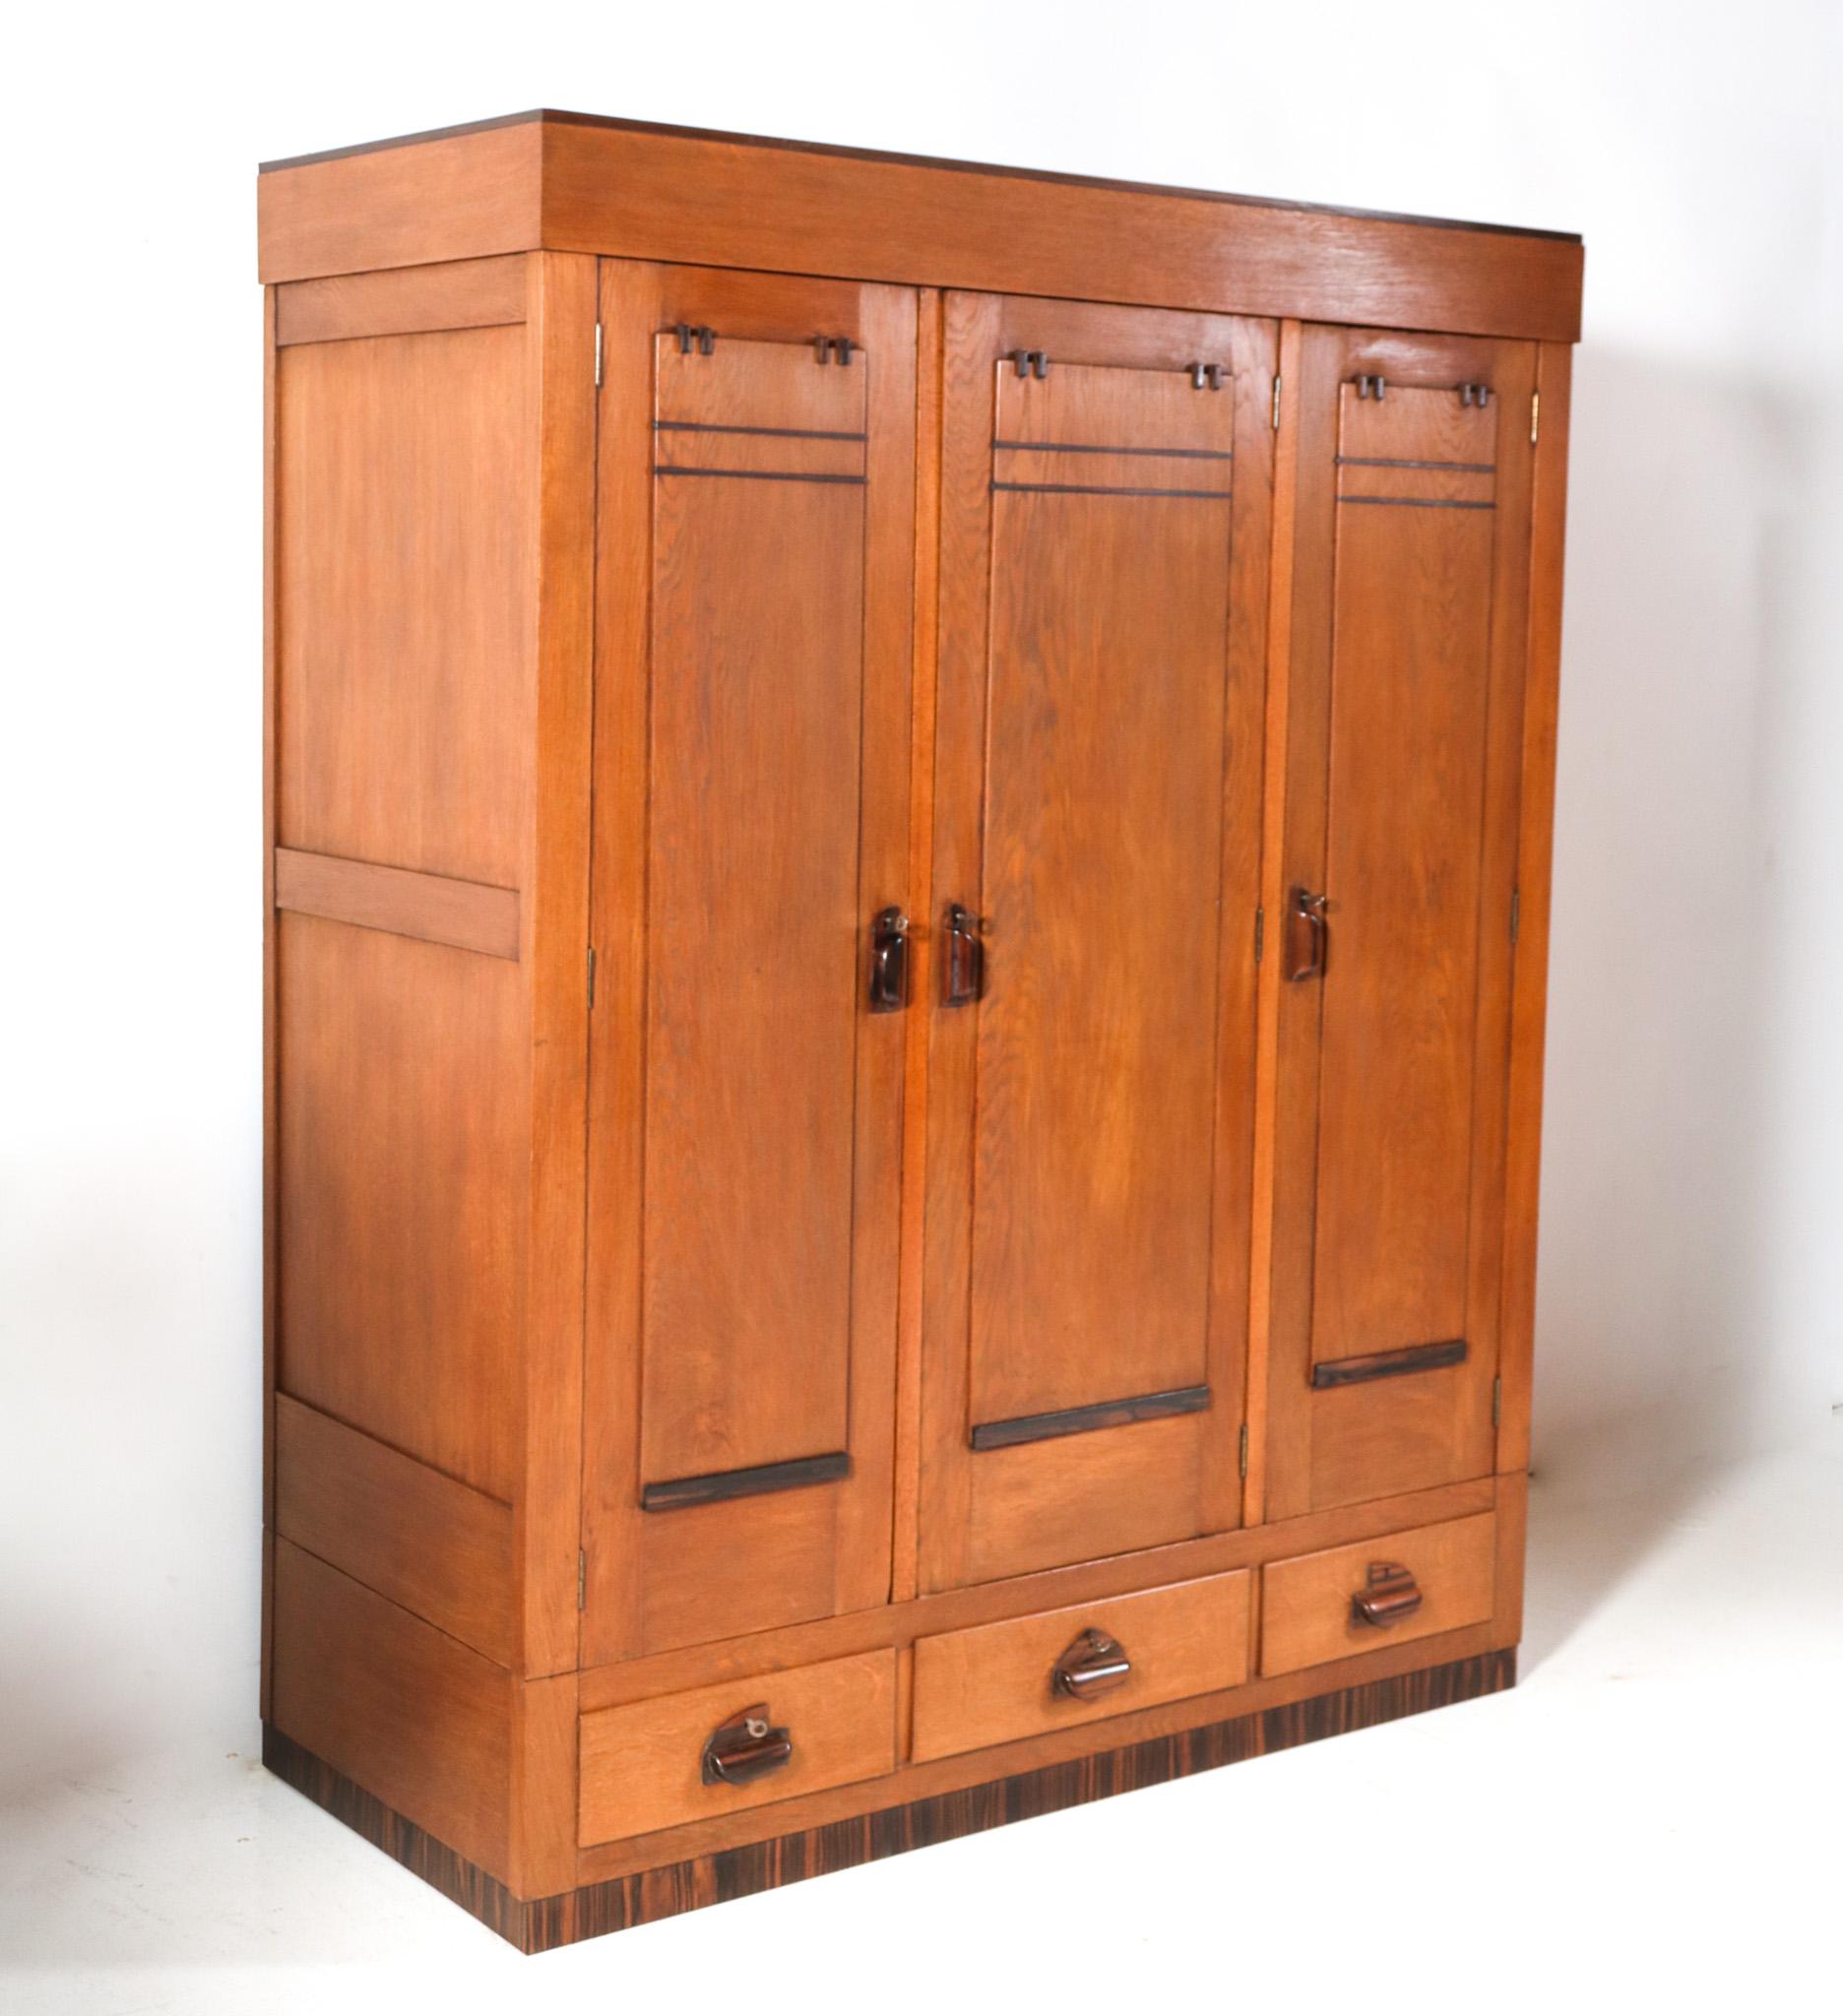 Magnificent and rare Art Deco Amsterdamse School three-doors armoire or wardrobe.
Striking Dutch design from the 1920s.
Solid oak base with solid macassar ebony handles on doors and drawers.
Behind the left door and right door, six original solid